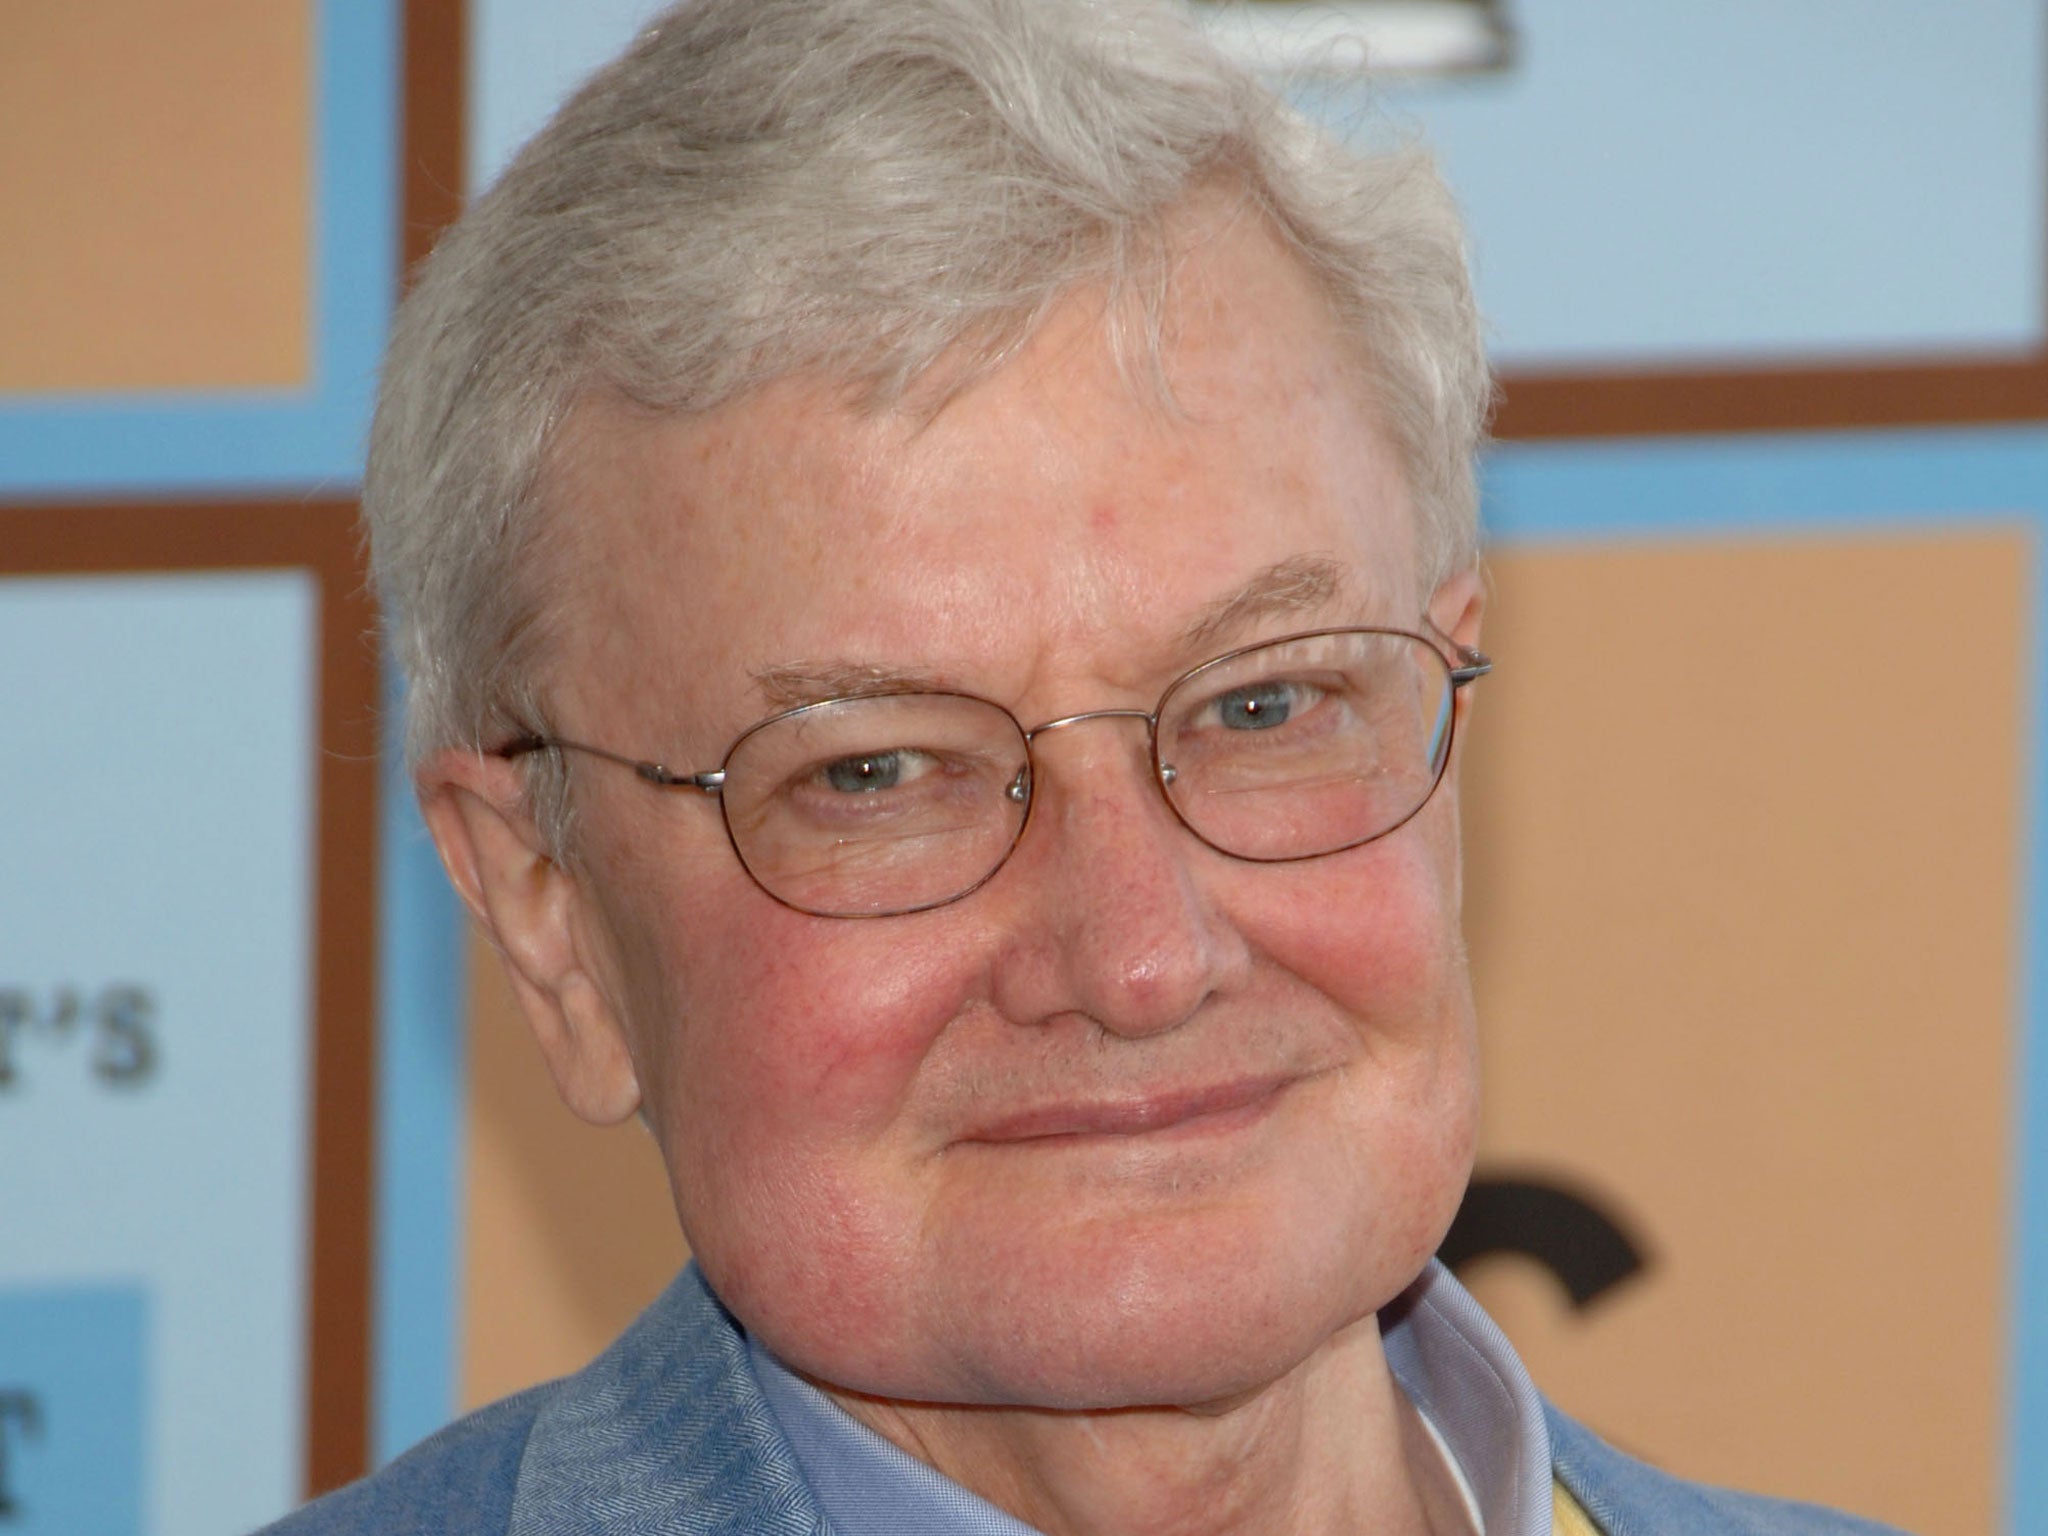 Pulitzer Prize Winning Us Film Critic Roger Ebert Dies Aged 70 The Independent The Independent 